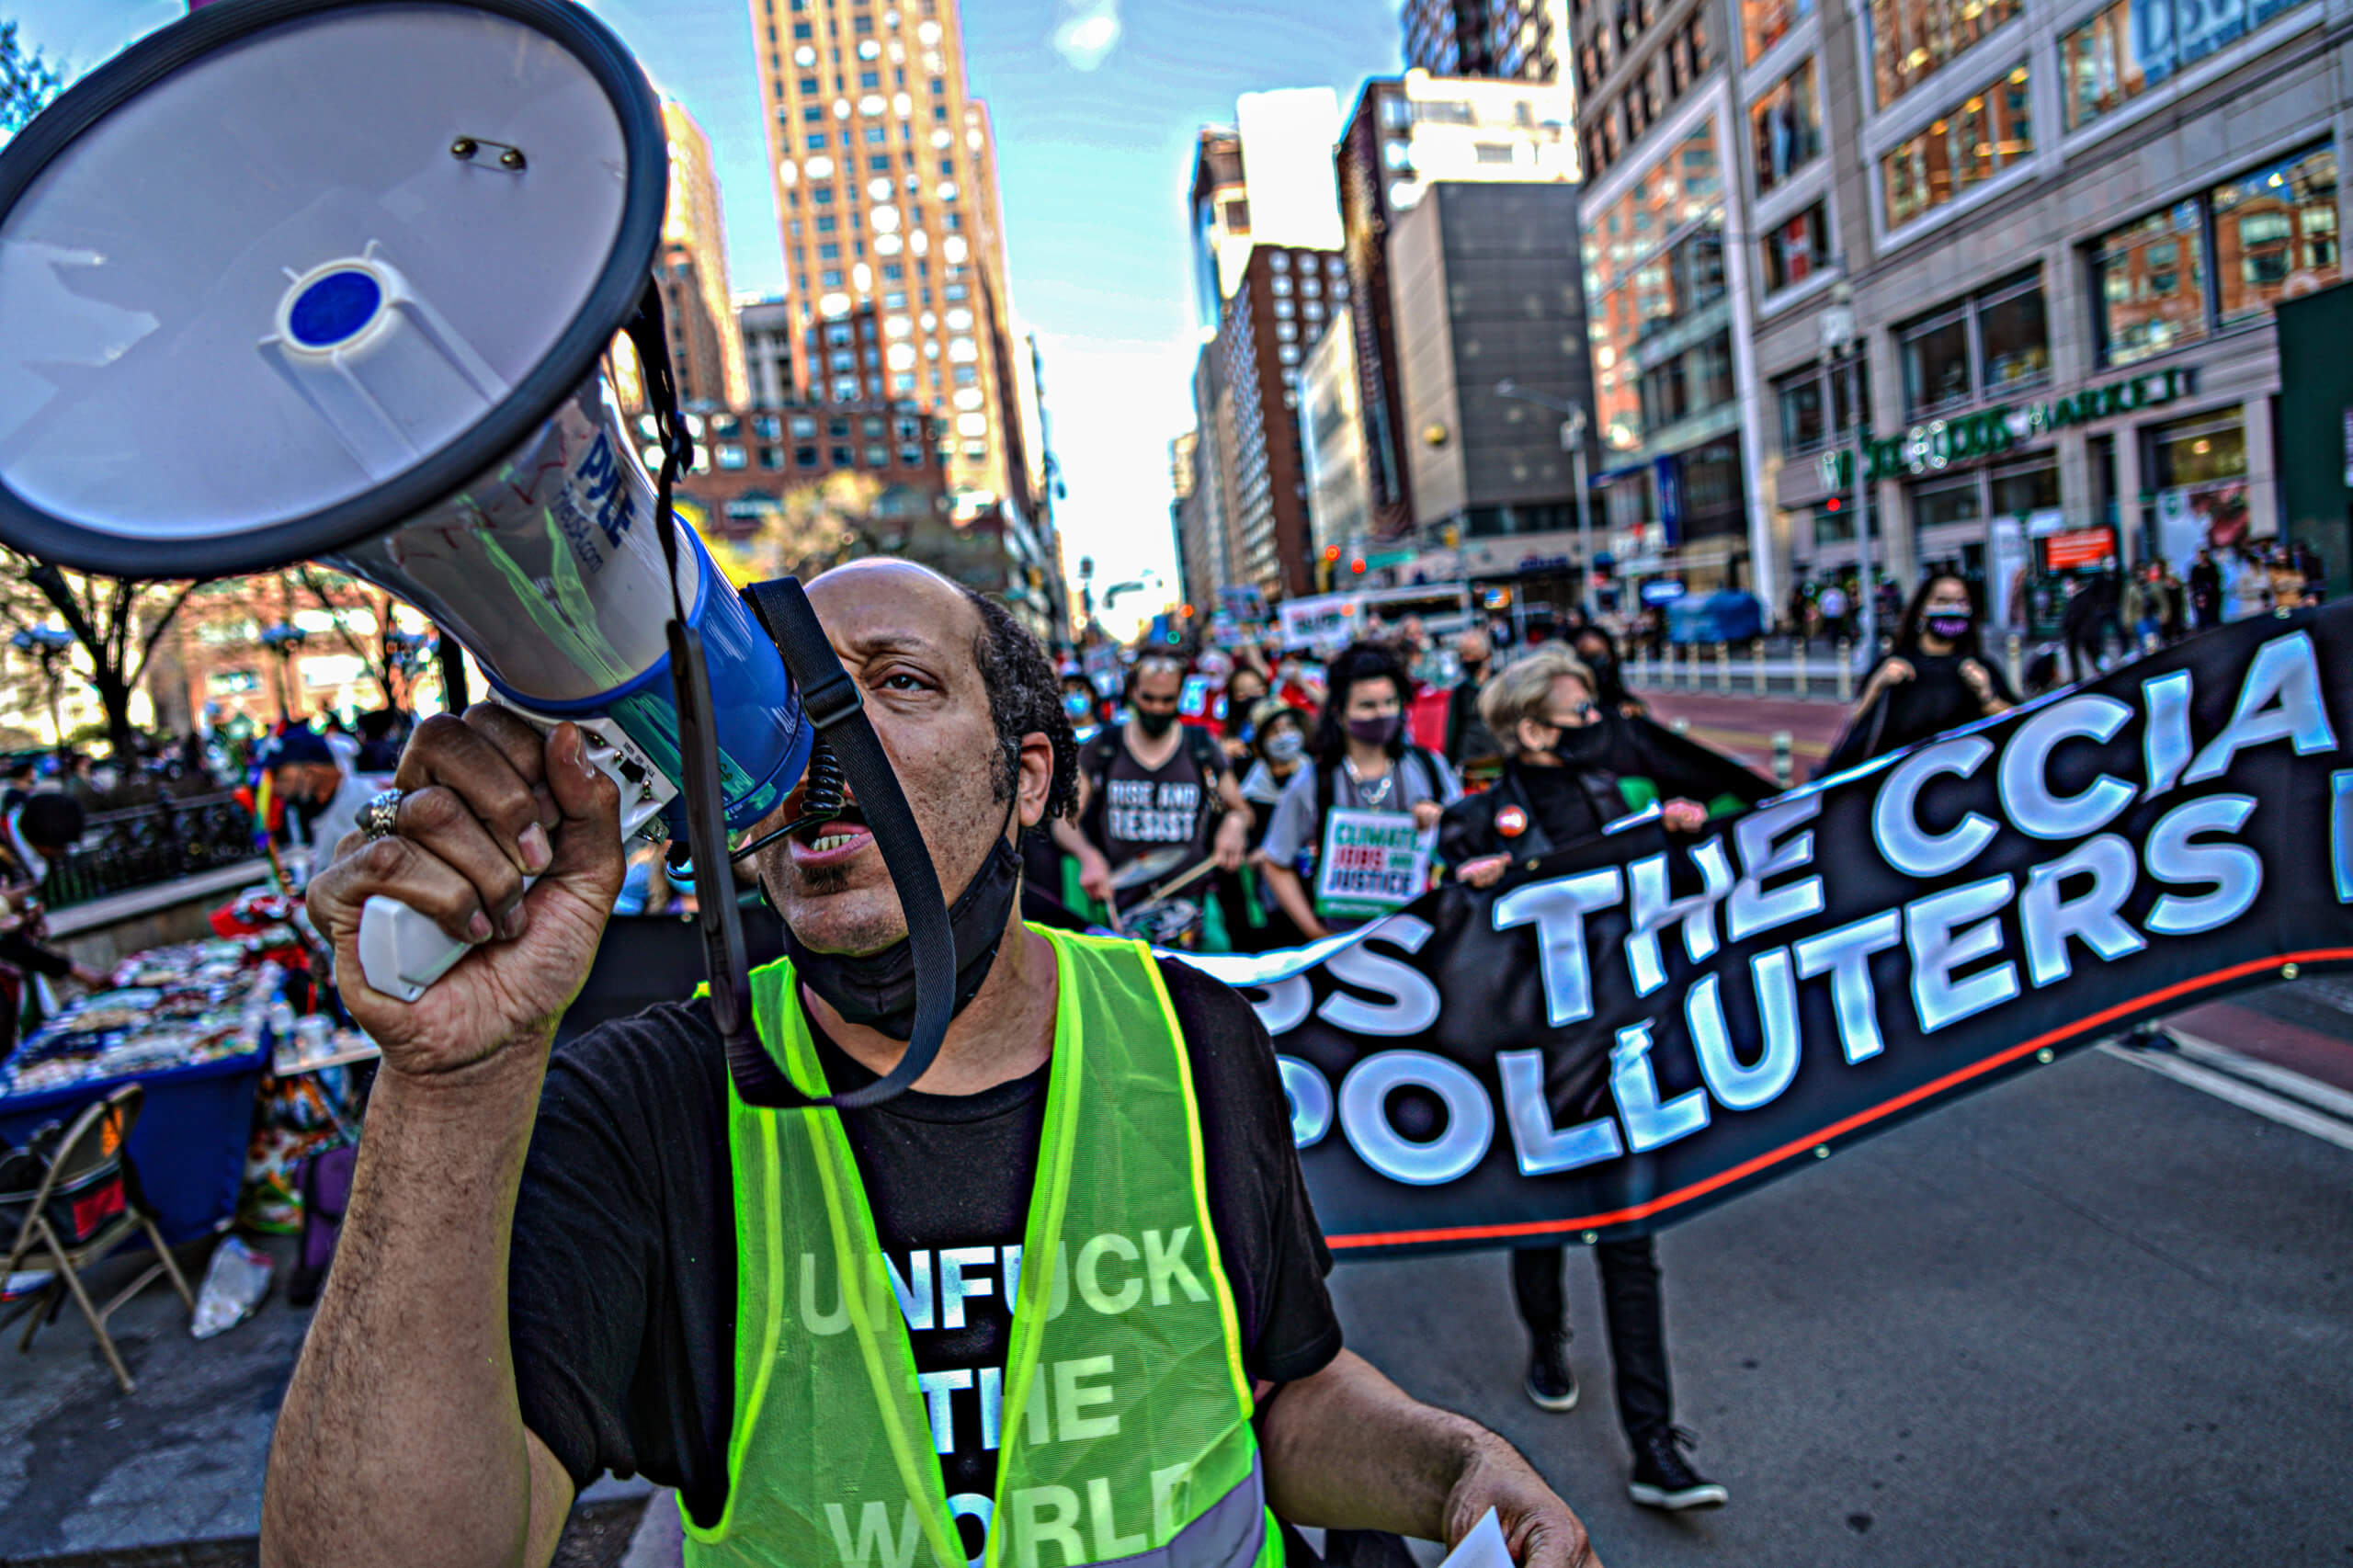 Environmentalists march in Union Square to prevent climate change | amNewYork - amNY